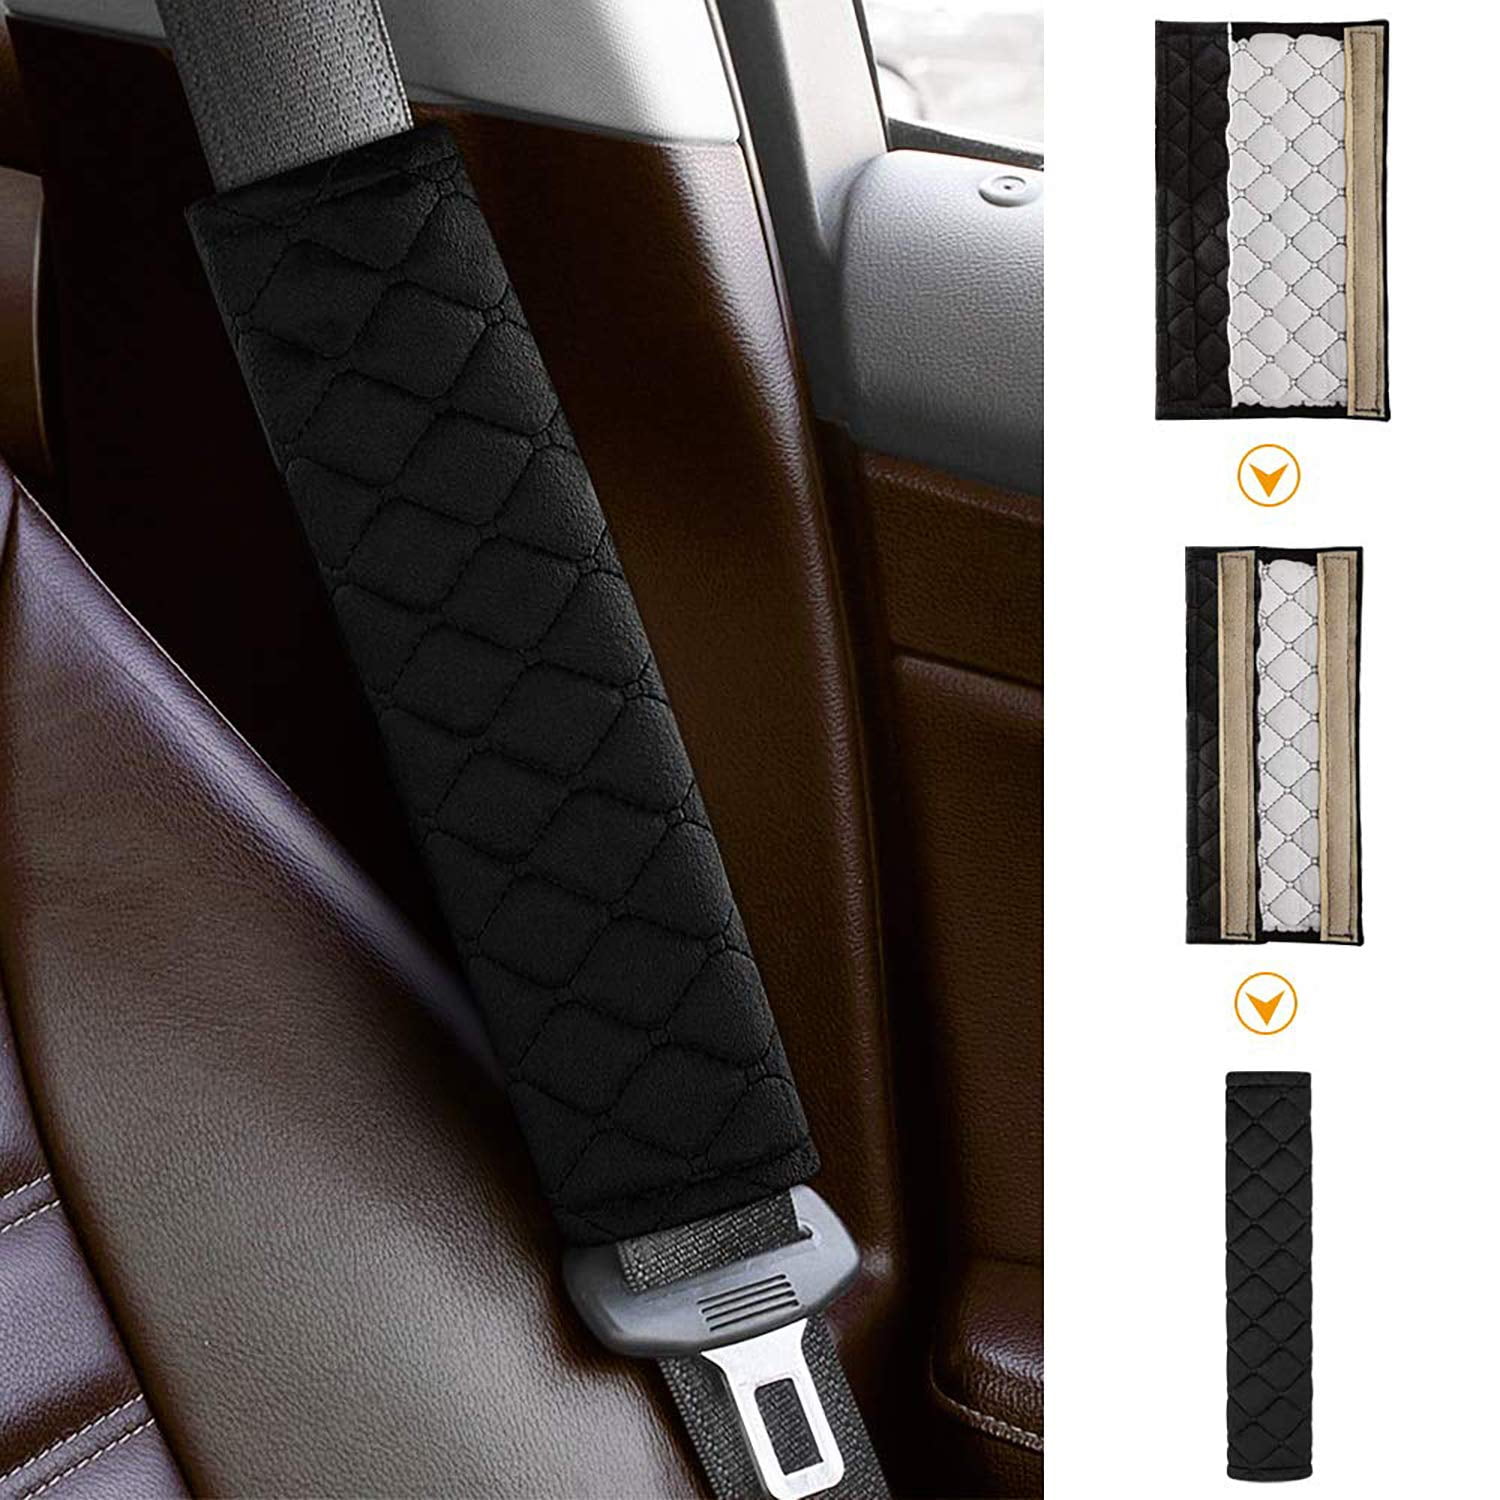 Universal Seat-belt Covers Shoulder Pads Car Safety Cushion Harness Soft H 